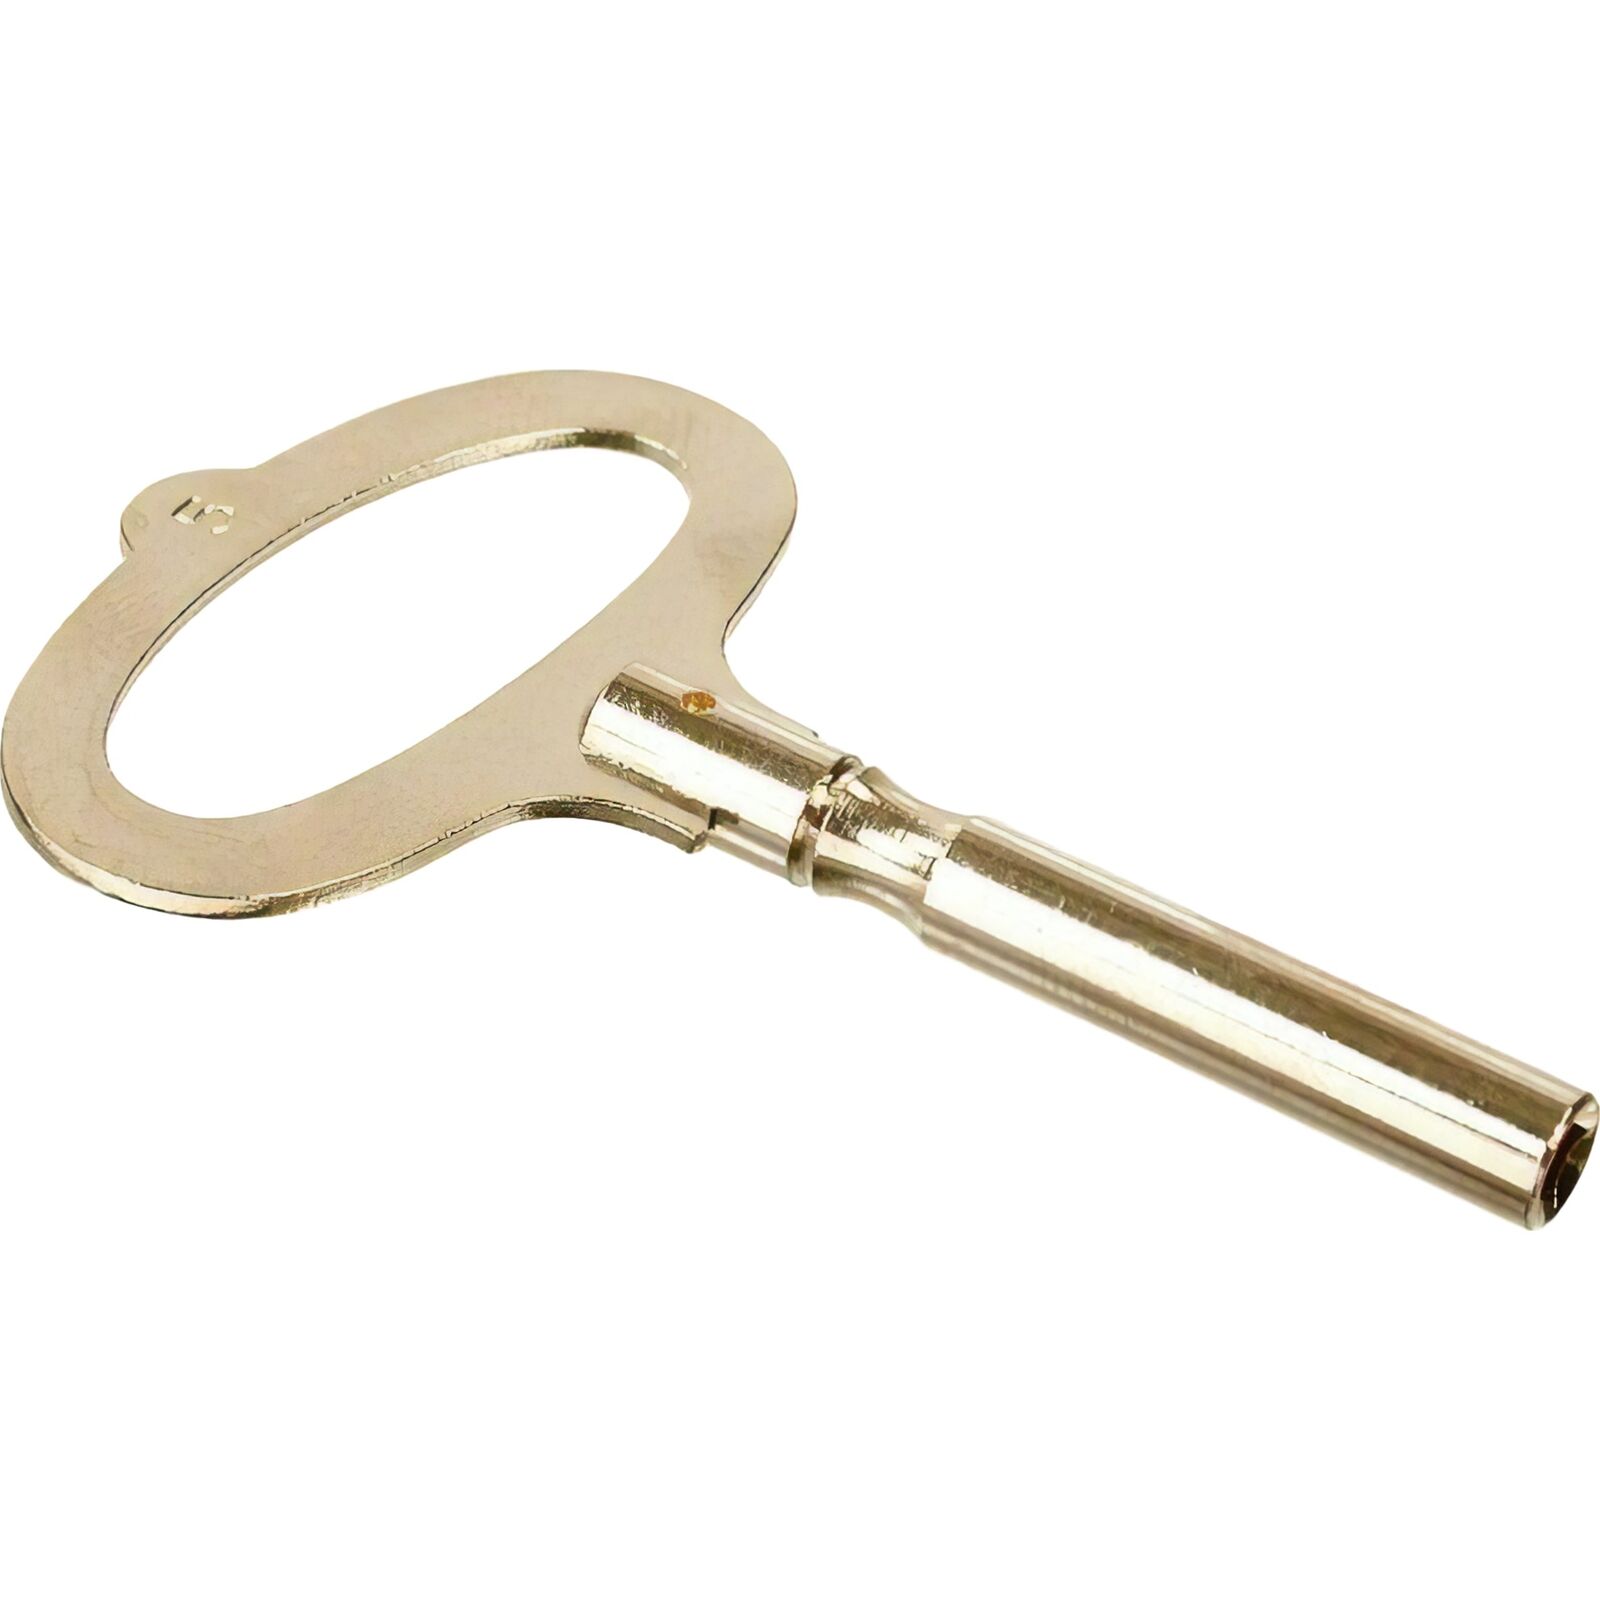 Replacement Clock Key Size 5 / 3.5 mm For Key Wind Clocks